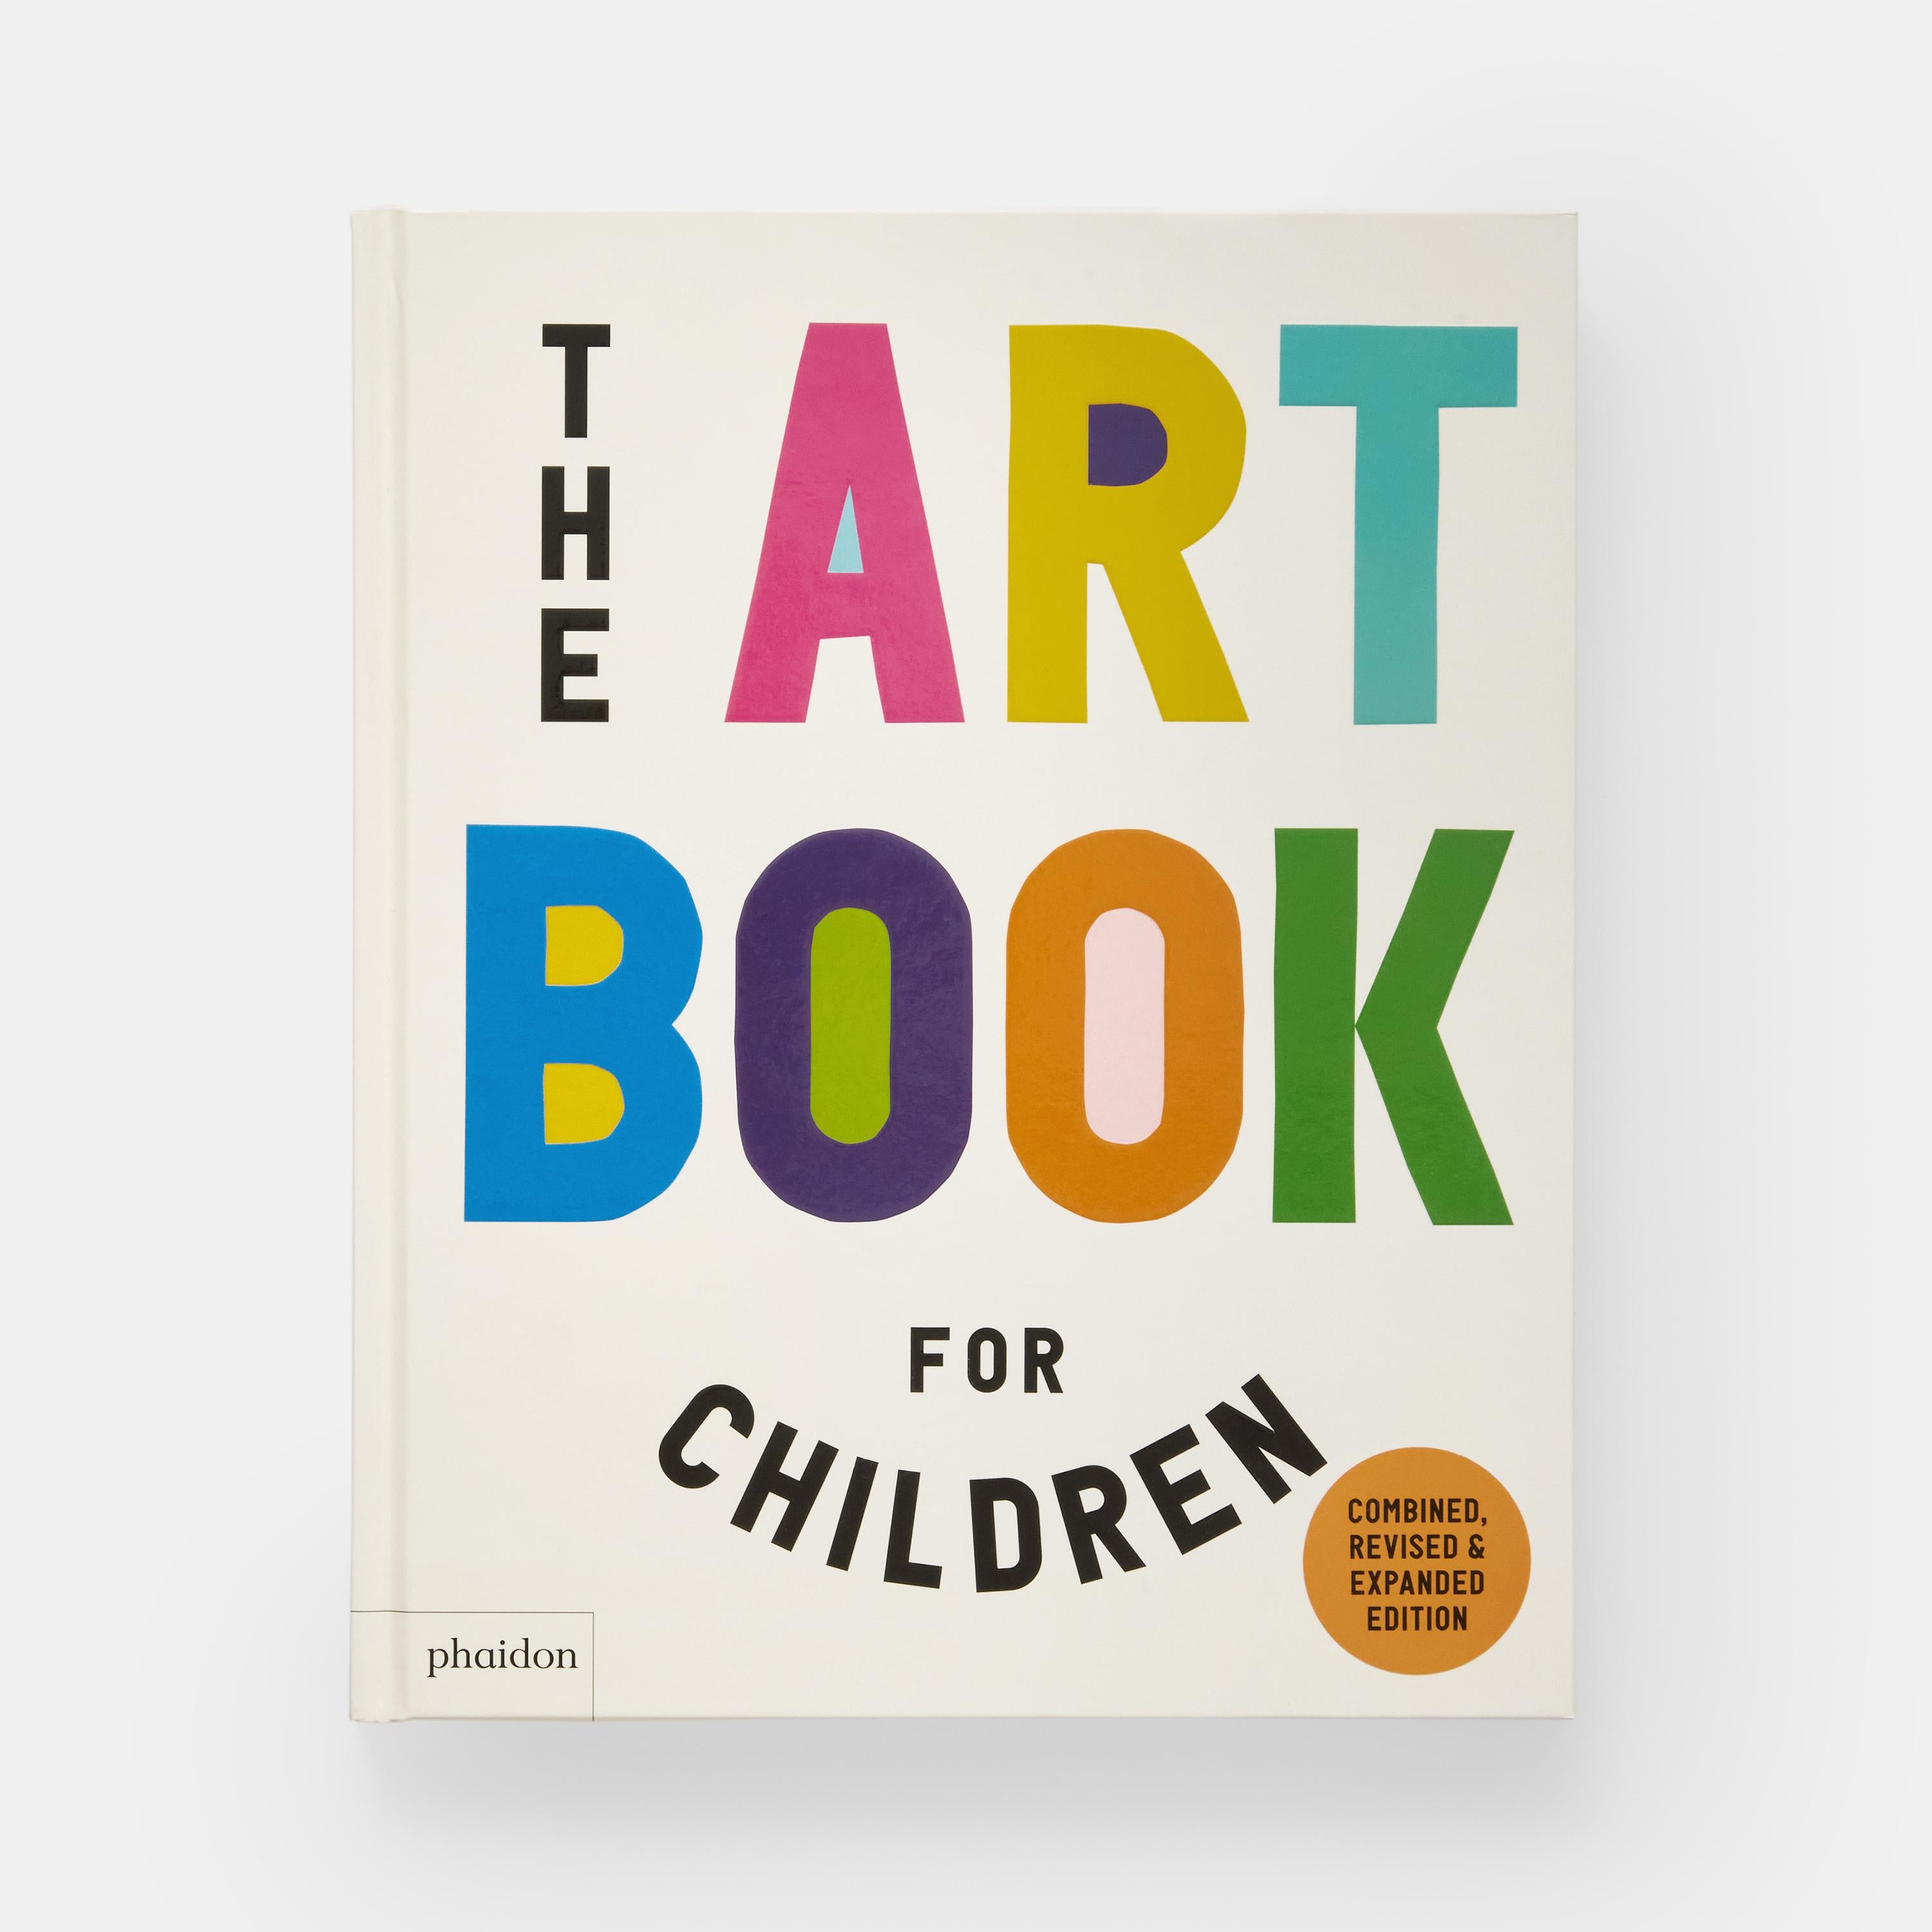 ‘A perfect introduction to art for parents and children to enjoy together.’ – The Guardian

A brand-new combined, revised, and expanded edition of the ground-breaking, iconic art book series for children – perfect for readers aged 7-12

Two decades